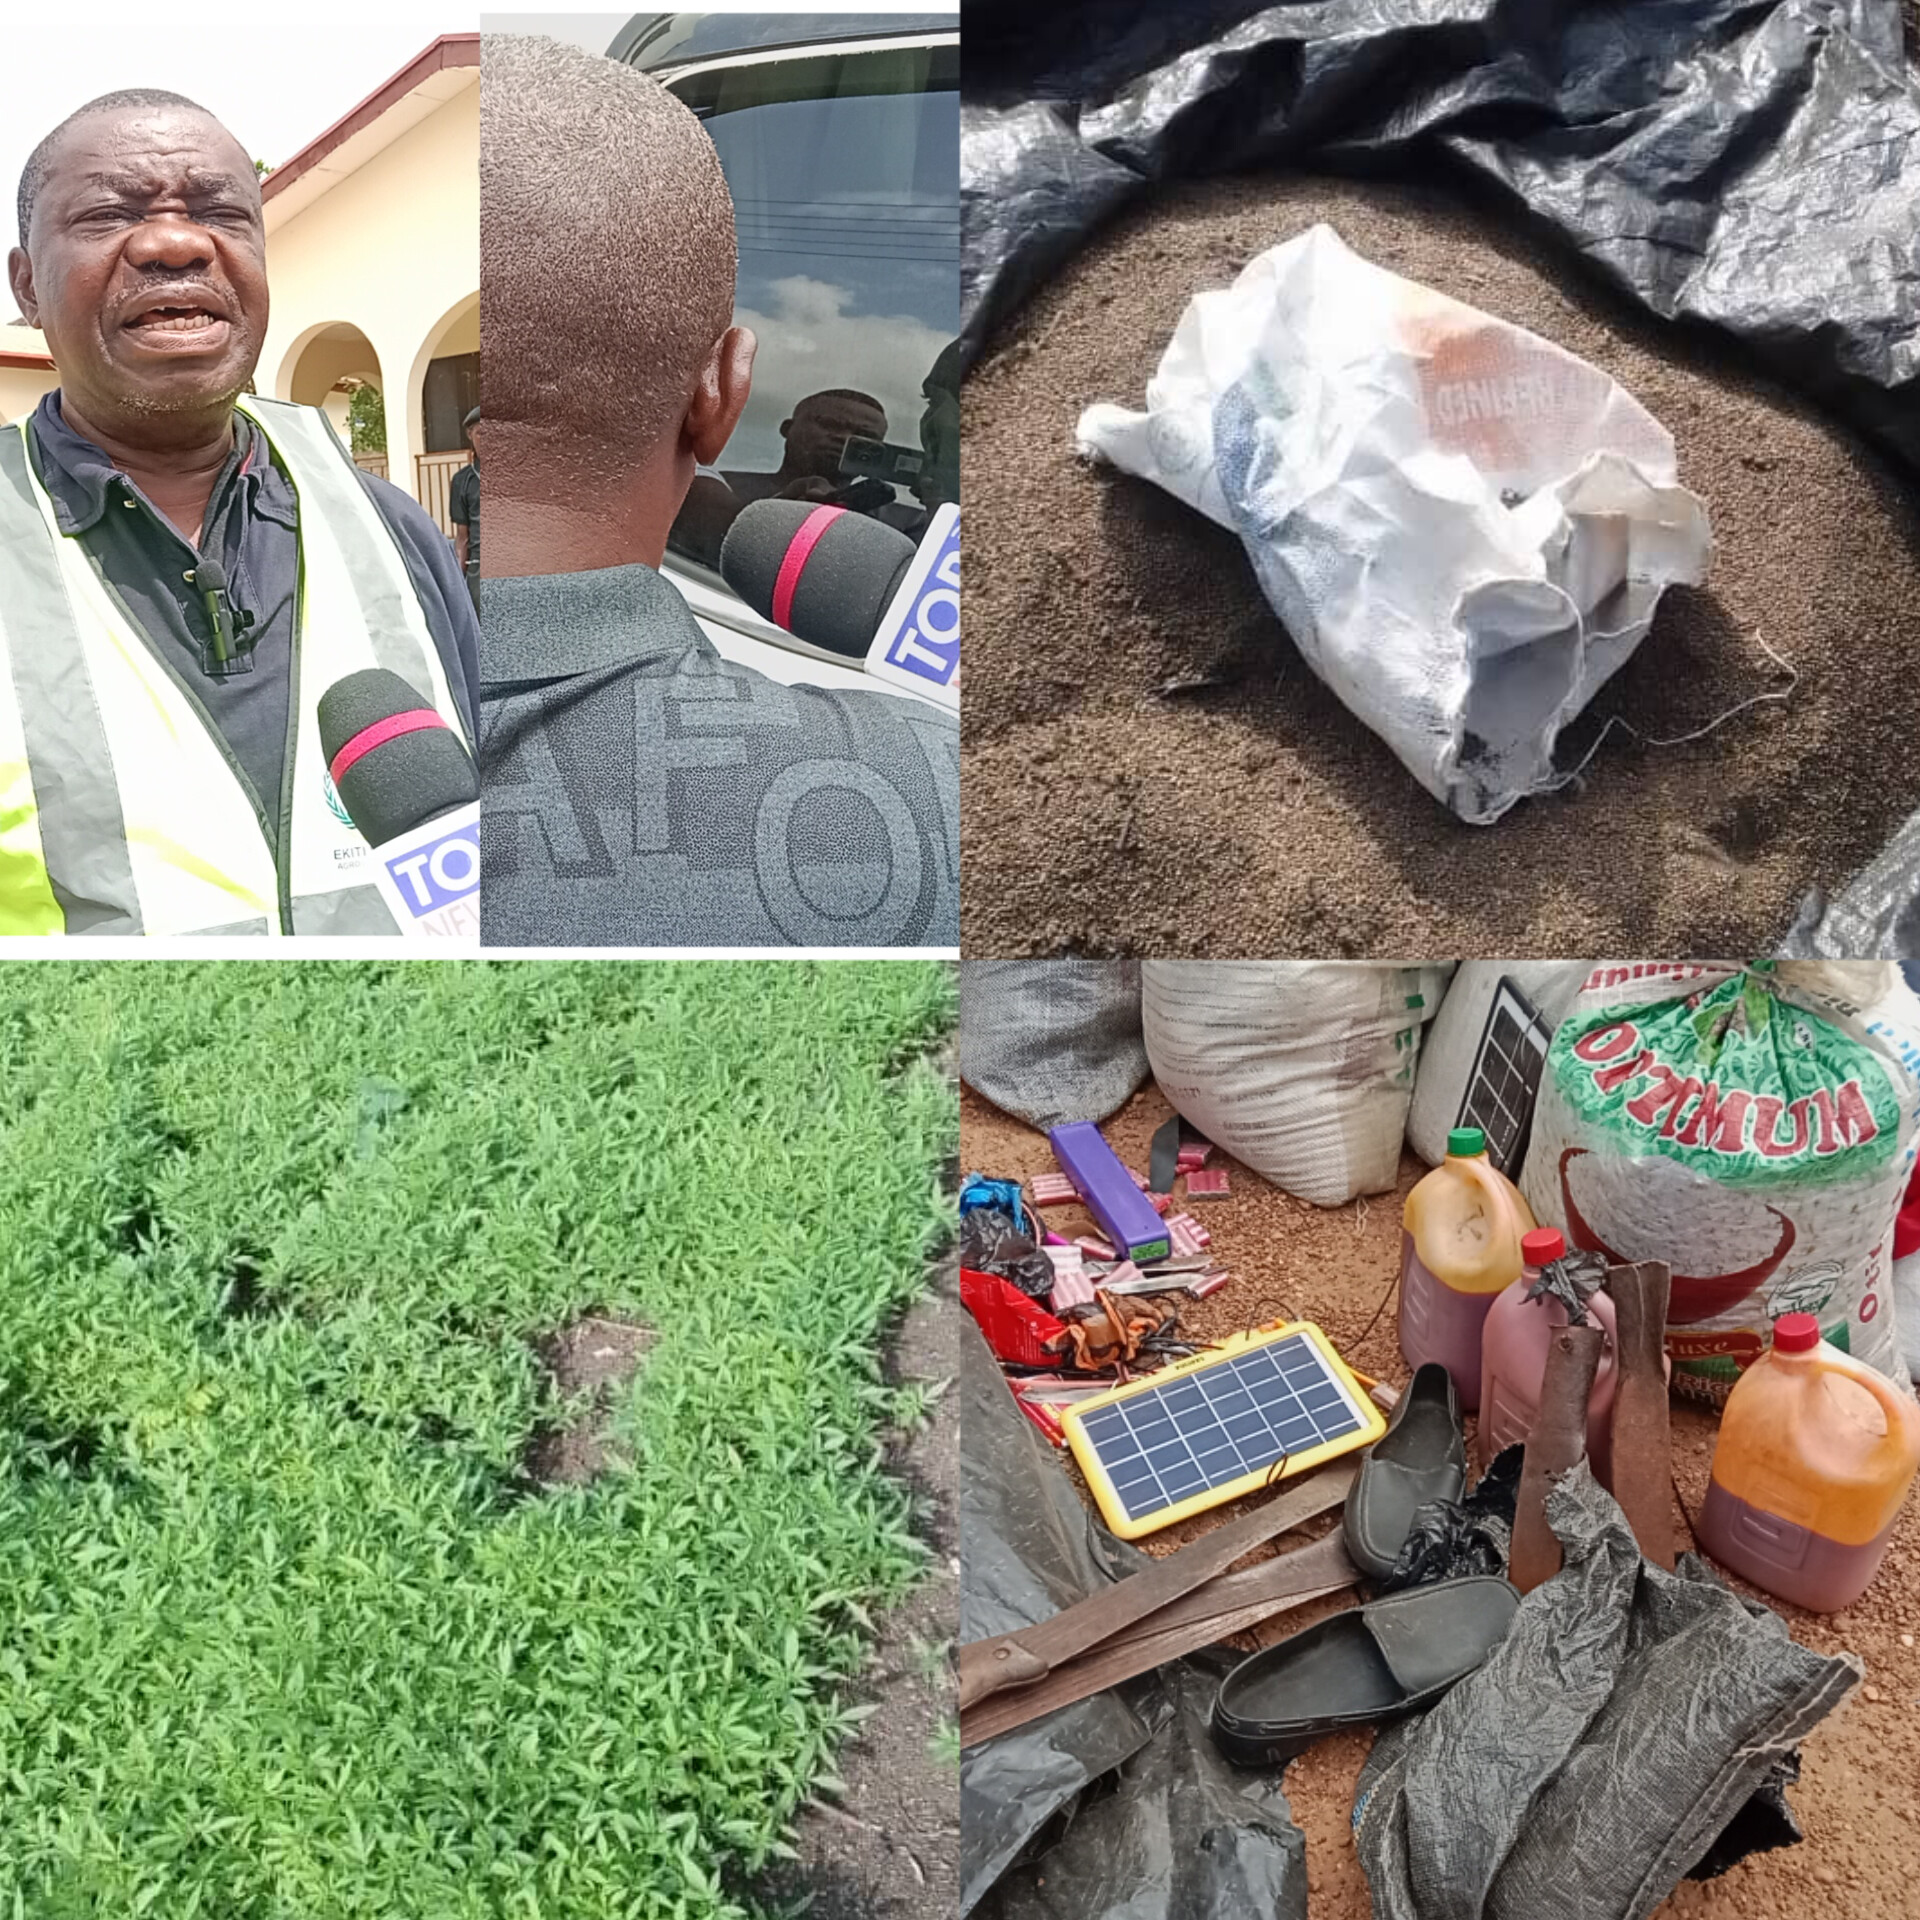 End Of Road As Ekiti Agro Marshal Corps Apprehends Suspected Cannabis Dealer, Others Flee (See Video)